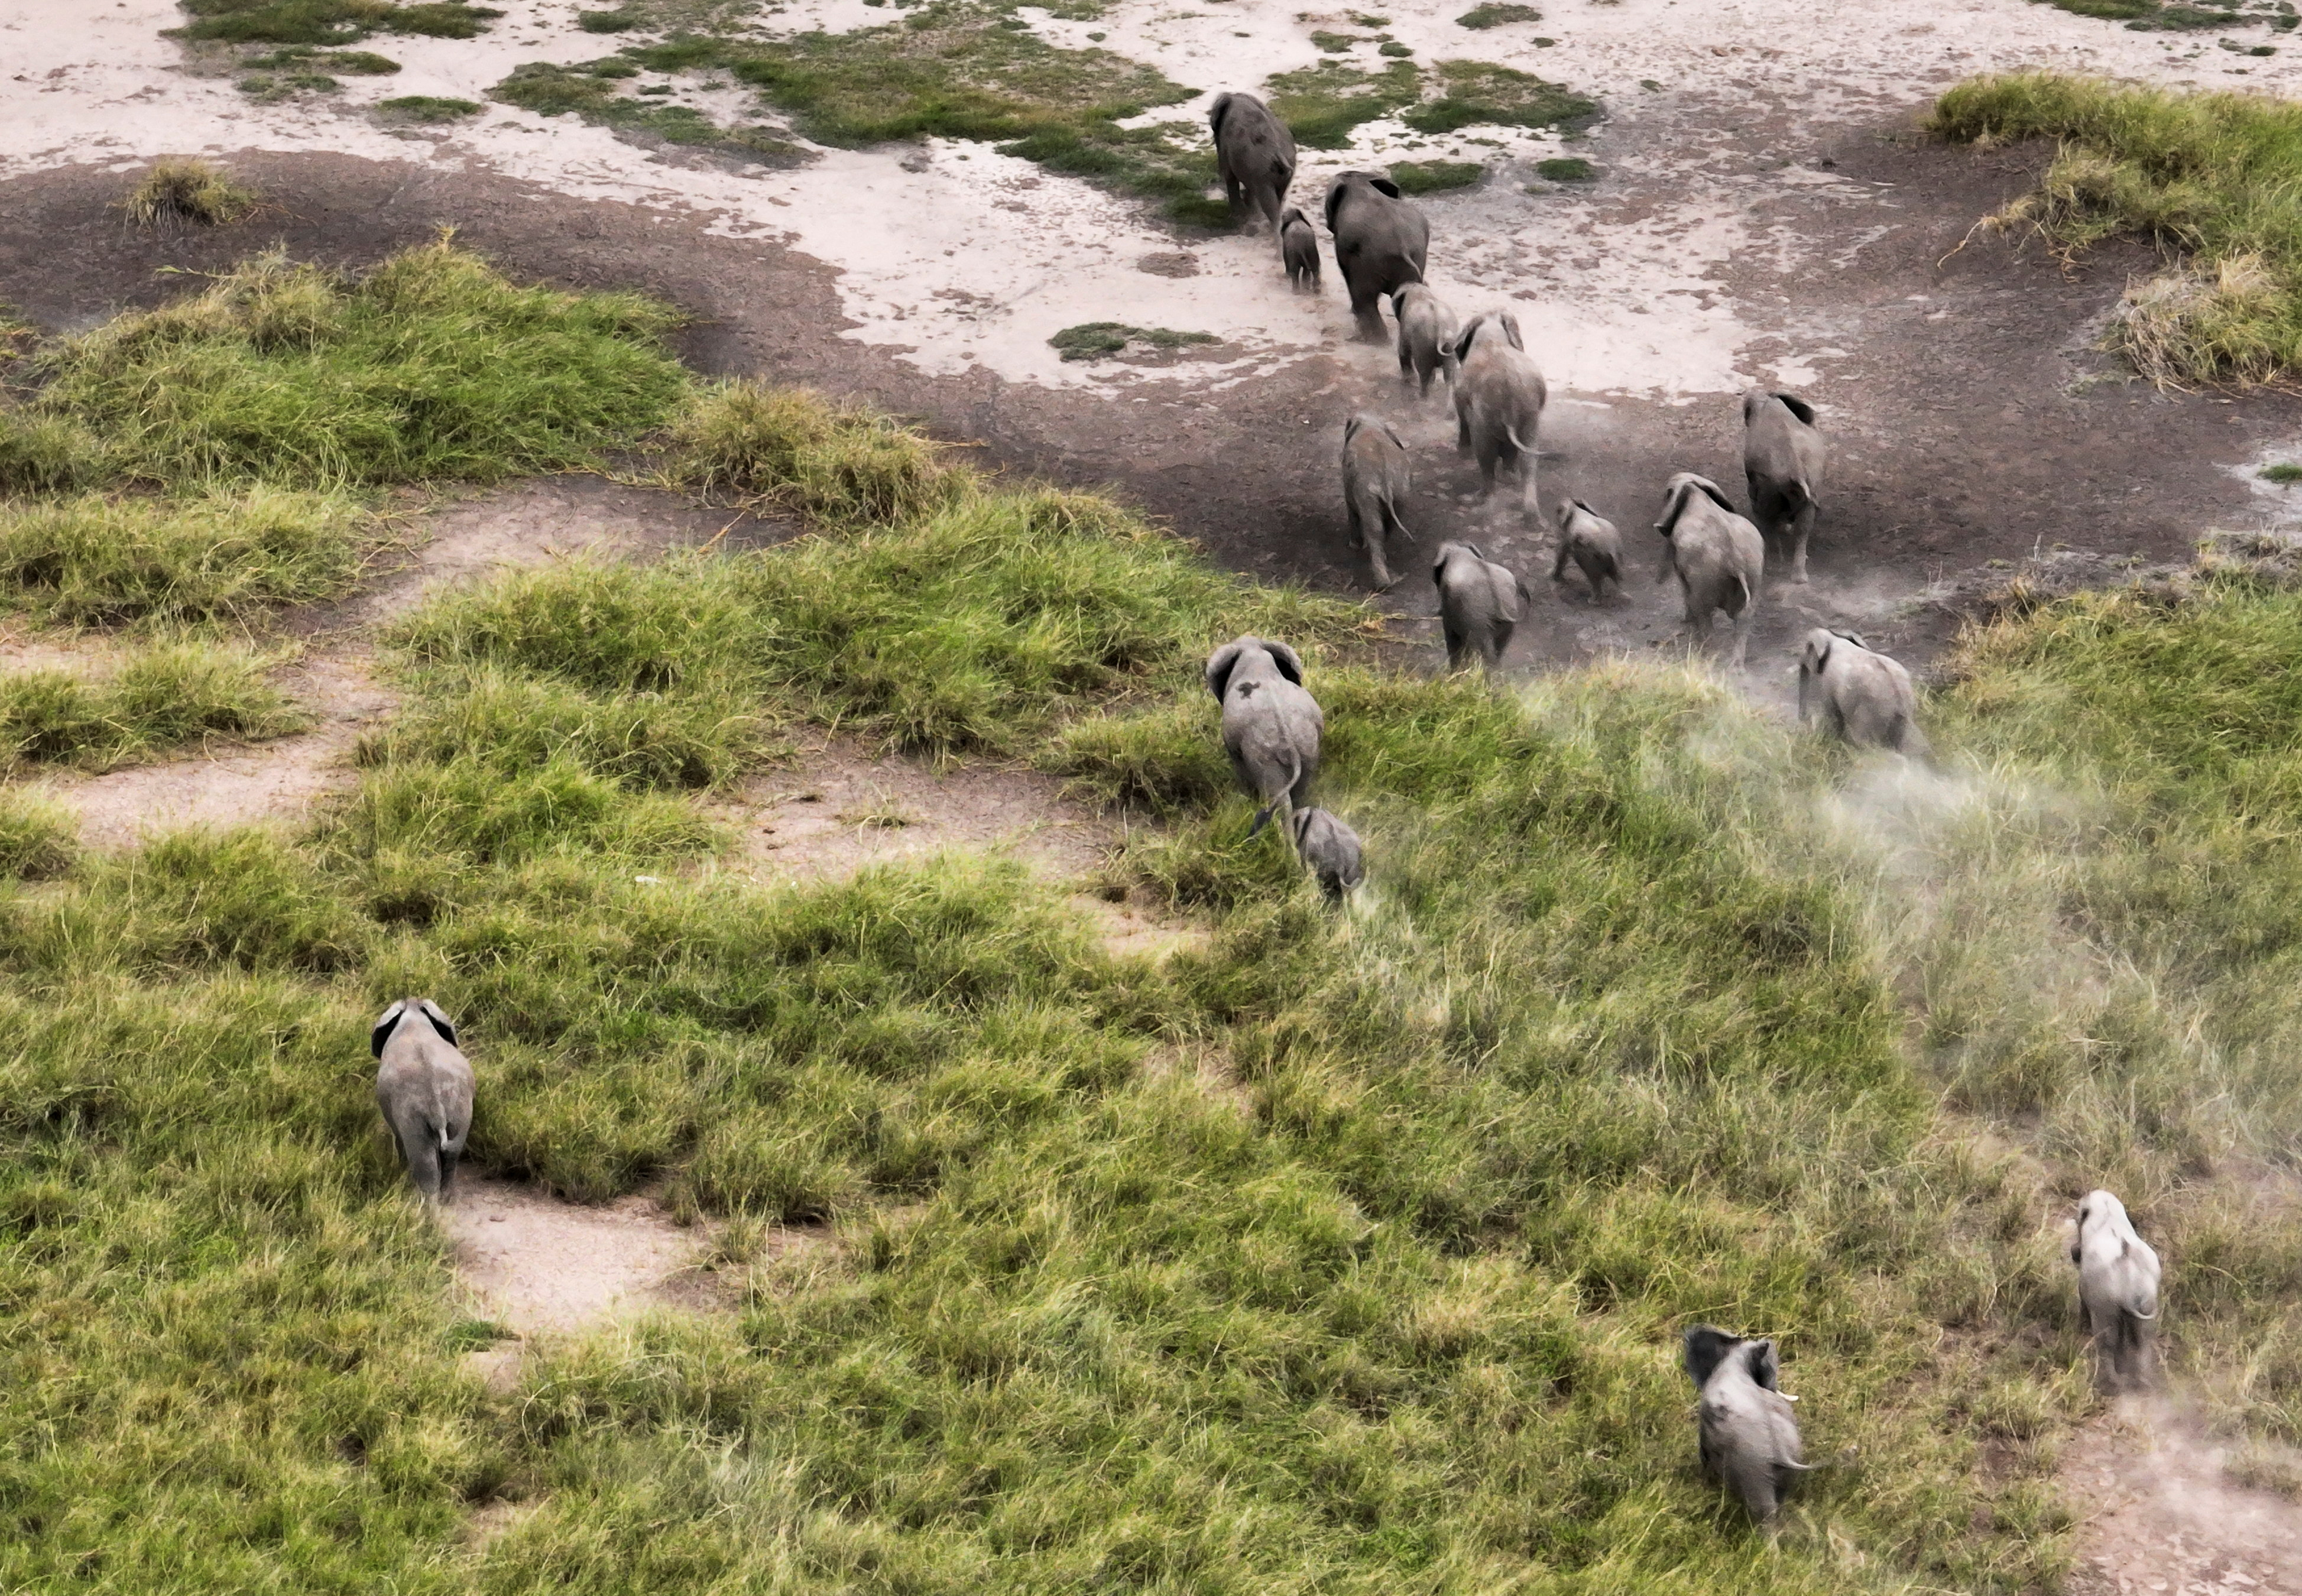 A drone view shows elephants walking in the Amboseli National Park in Amboseli